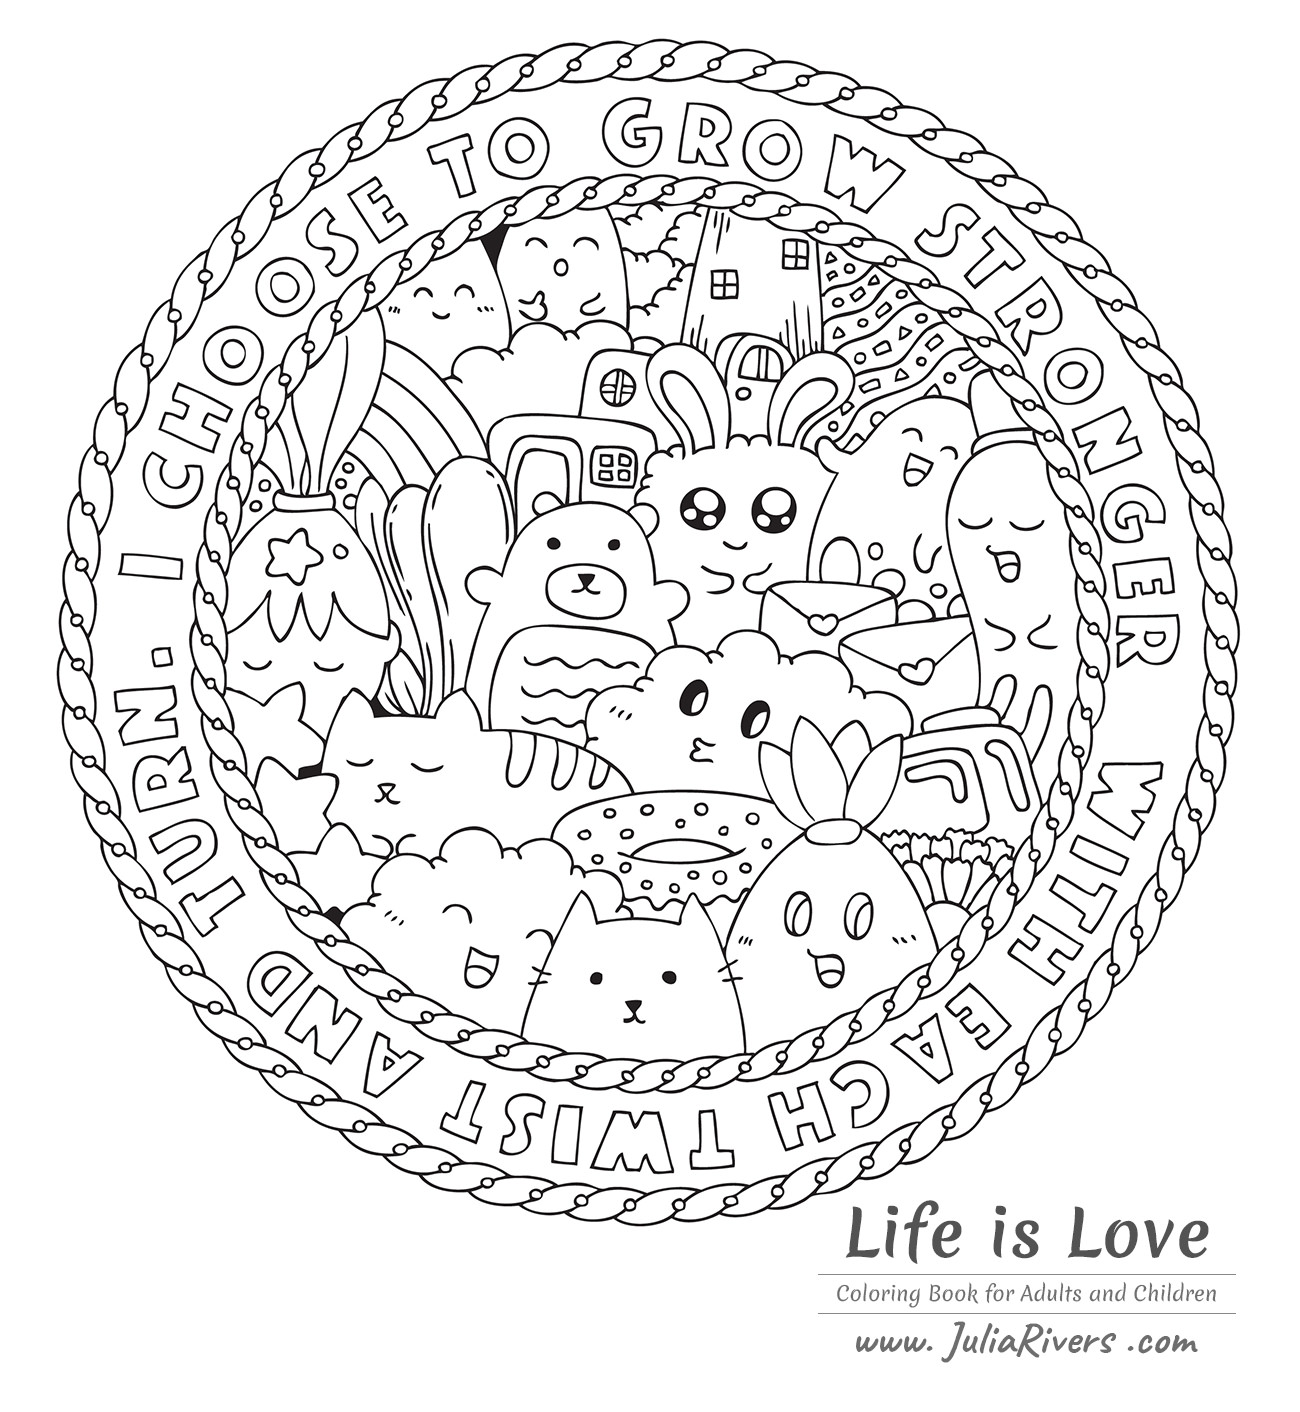 'Doodle Love is Life' : Beautiful coloring in the form of Mandala, with creatures drawn with the Kawaii style, and even a Donut!